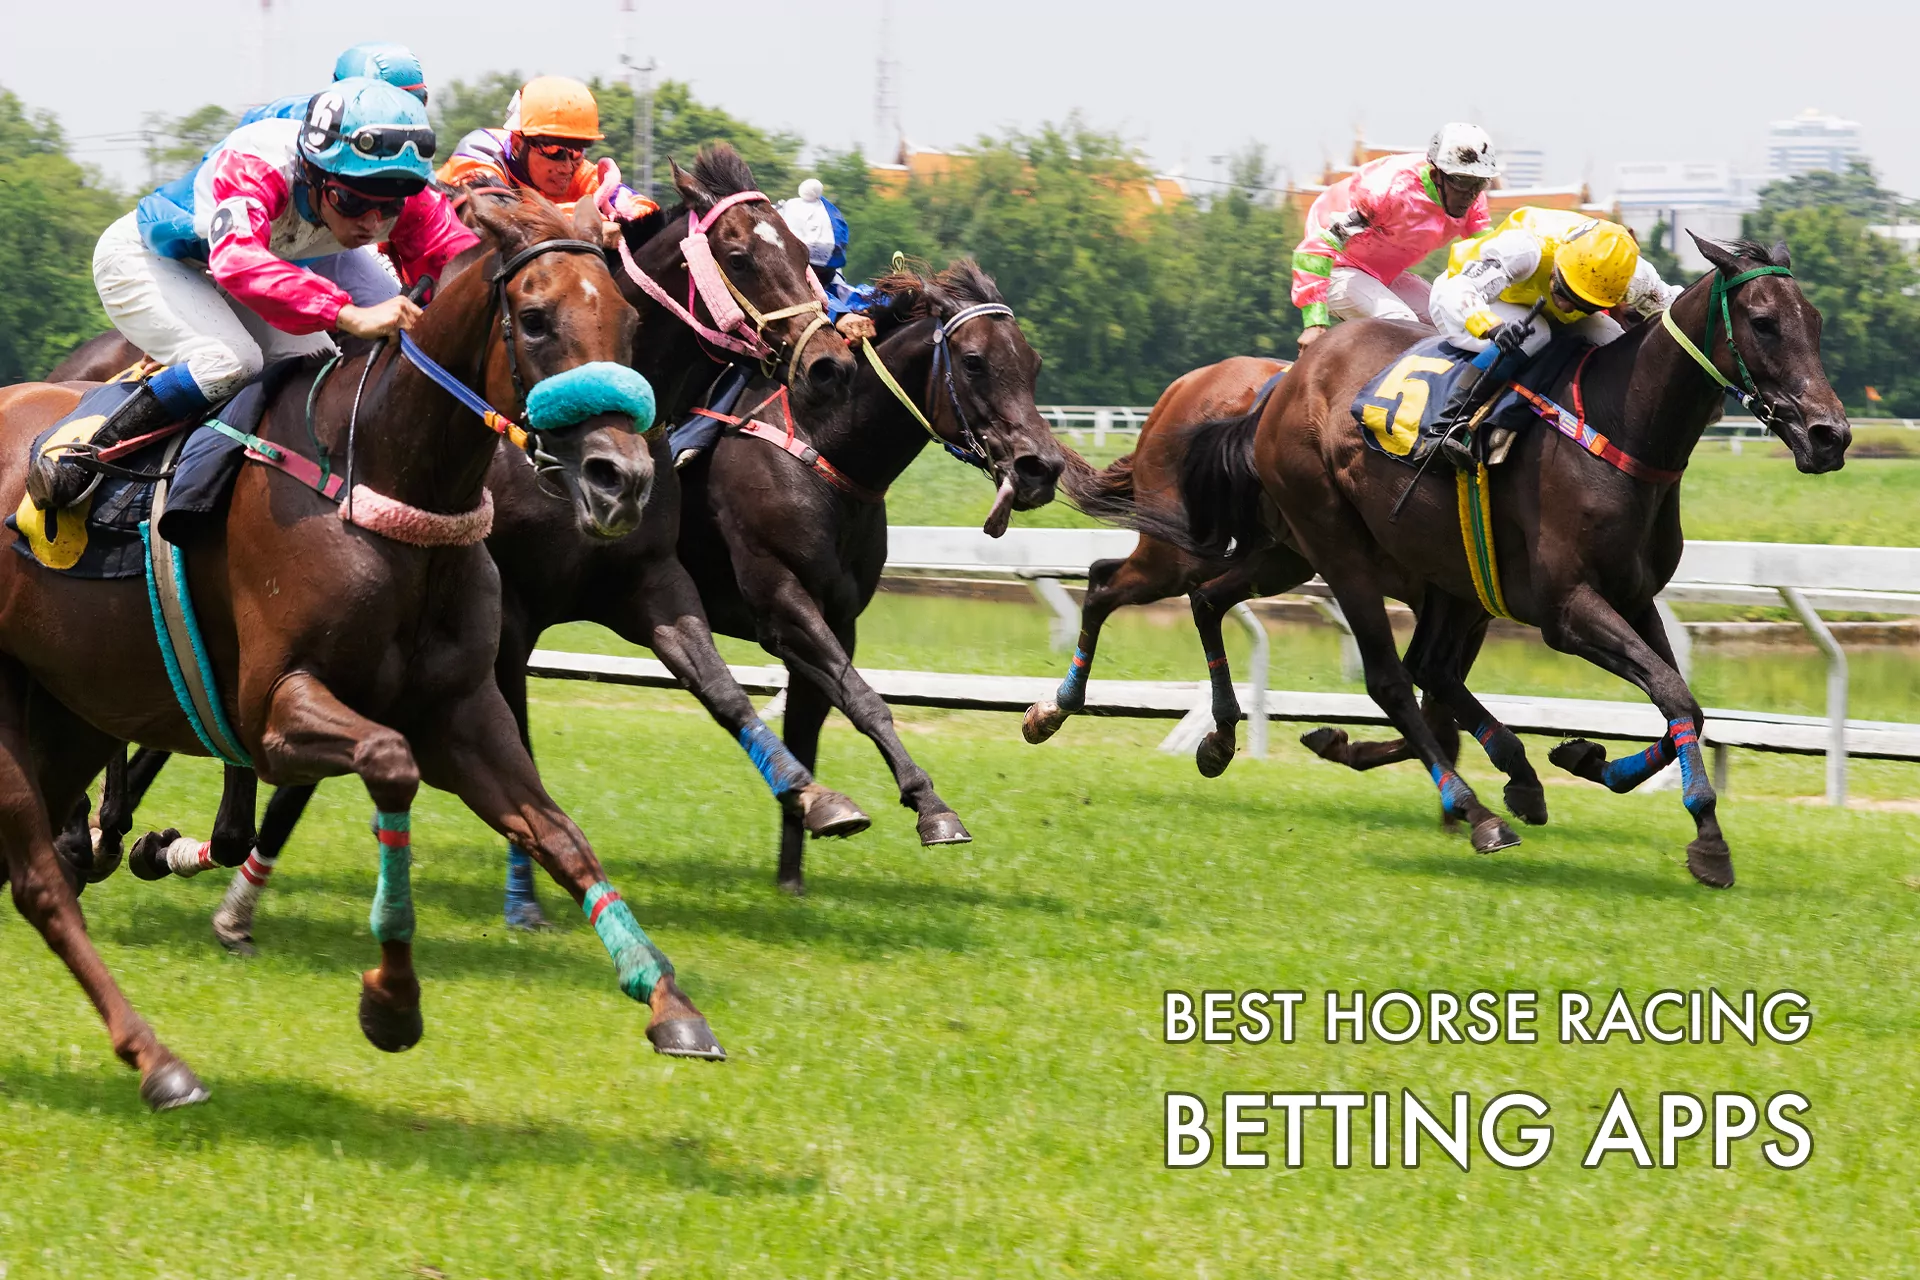 Betting on horse racing is presented the best way in these apps.